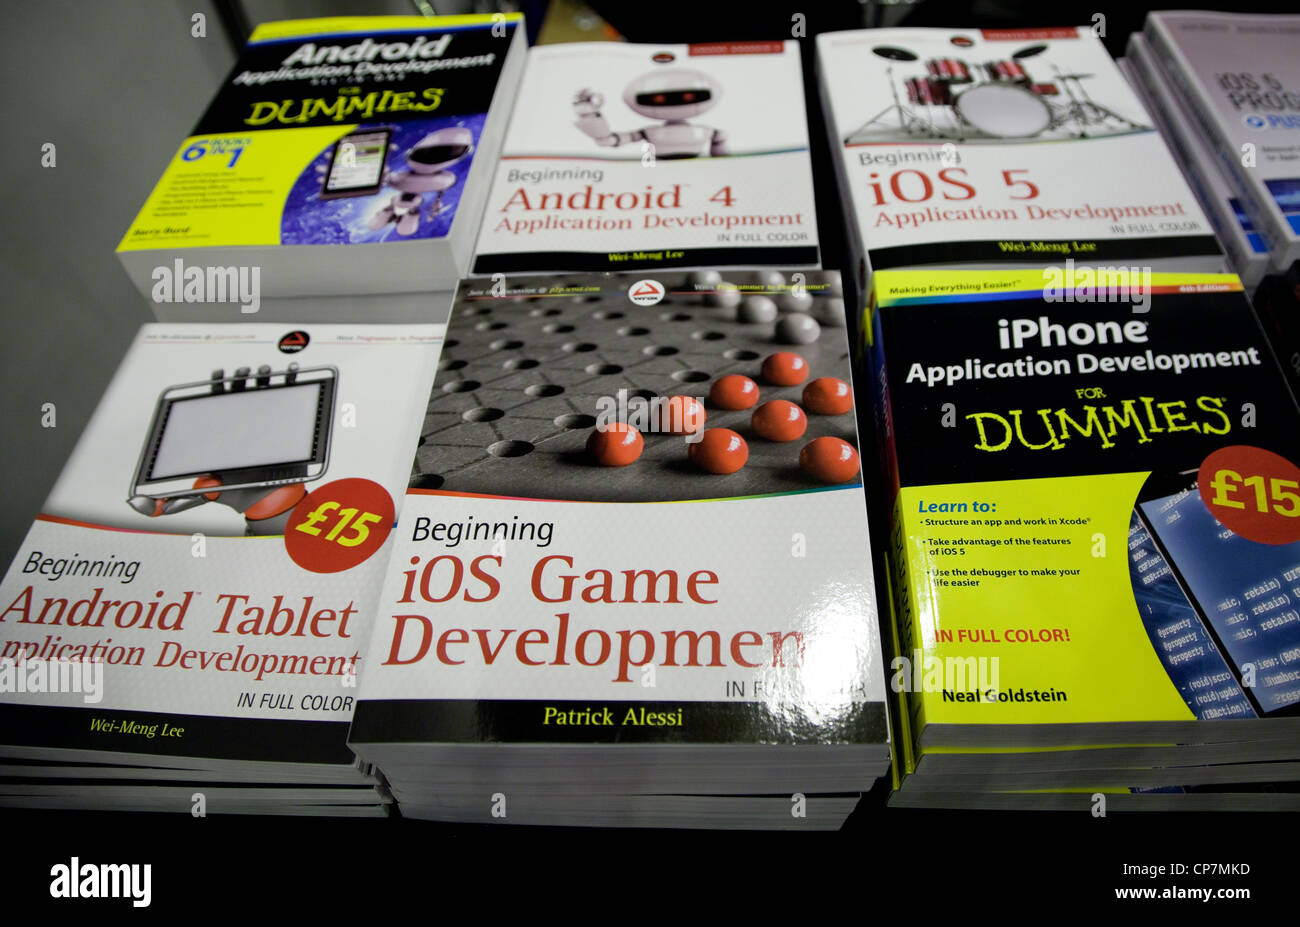 Books about Apps and games development at Internet World show in London Stock Photo